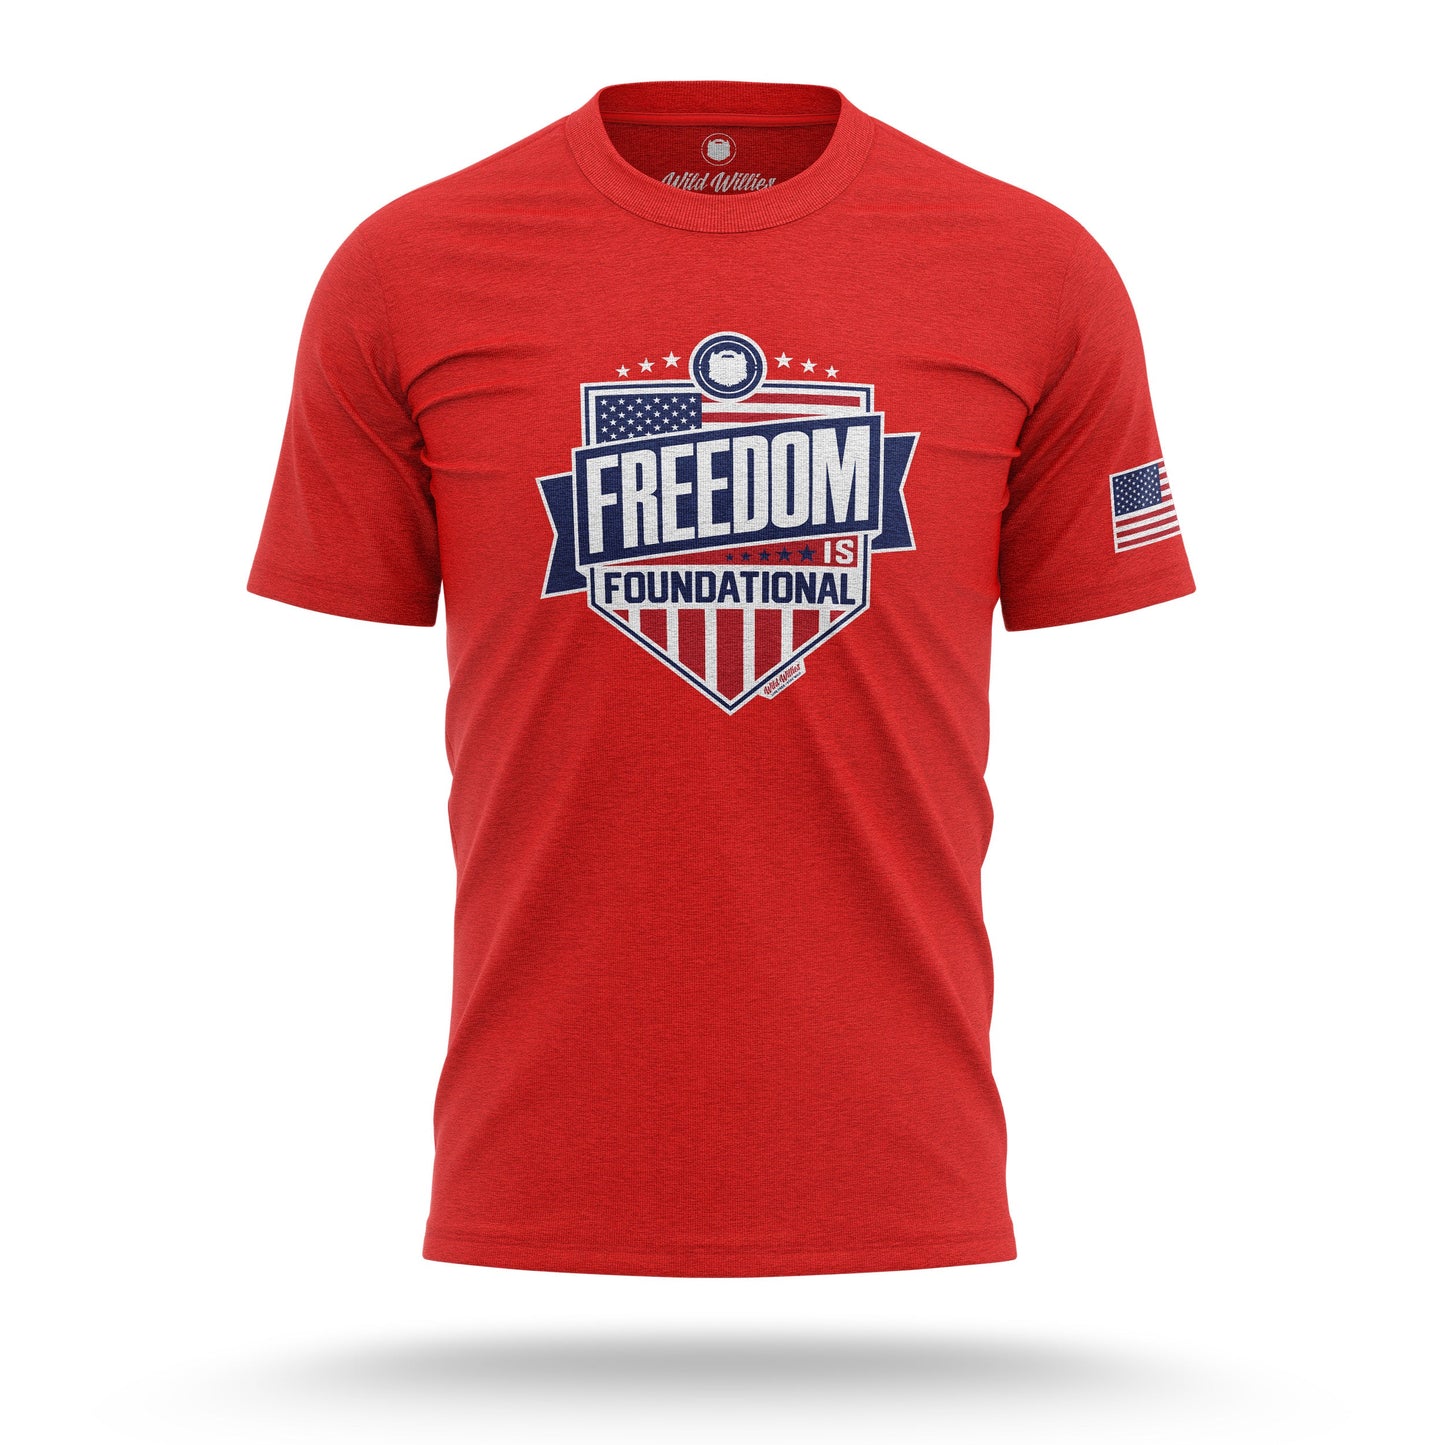 Freedom is Foundational - T-Shirt T-Shirt Wild-Willies S Red 